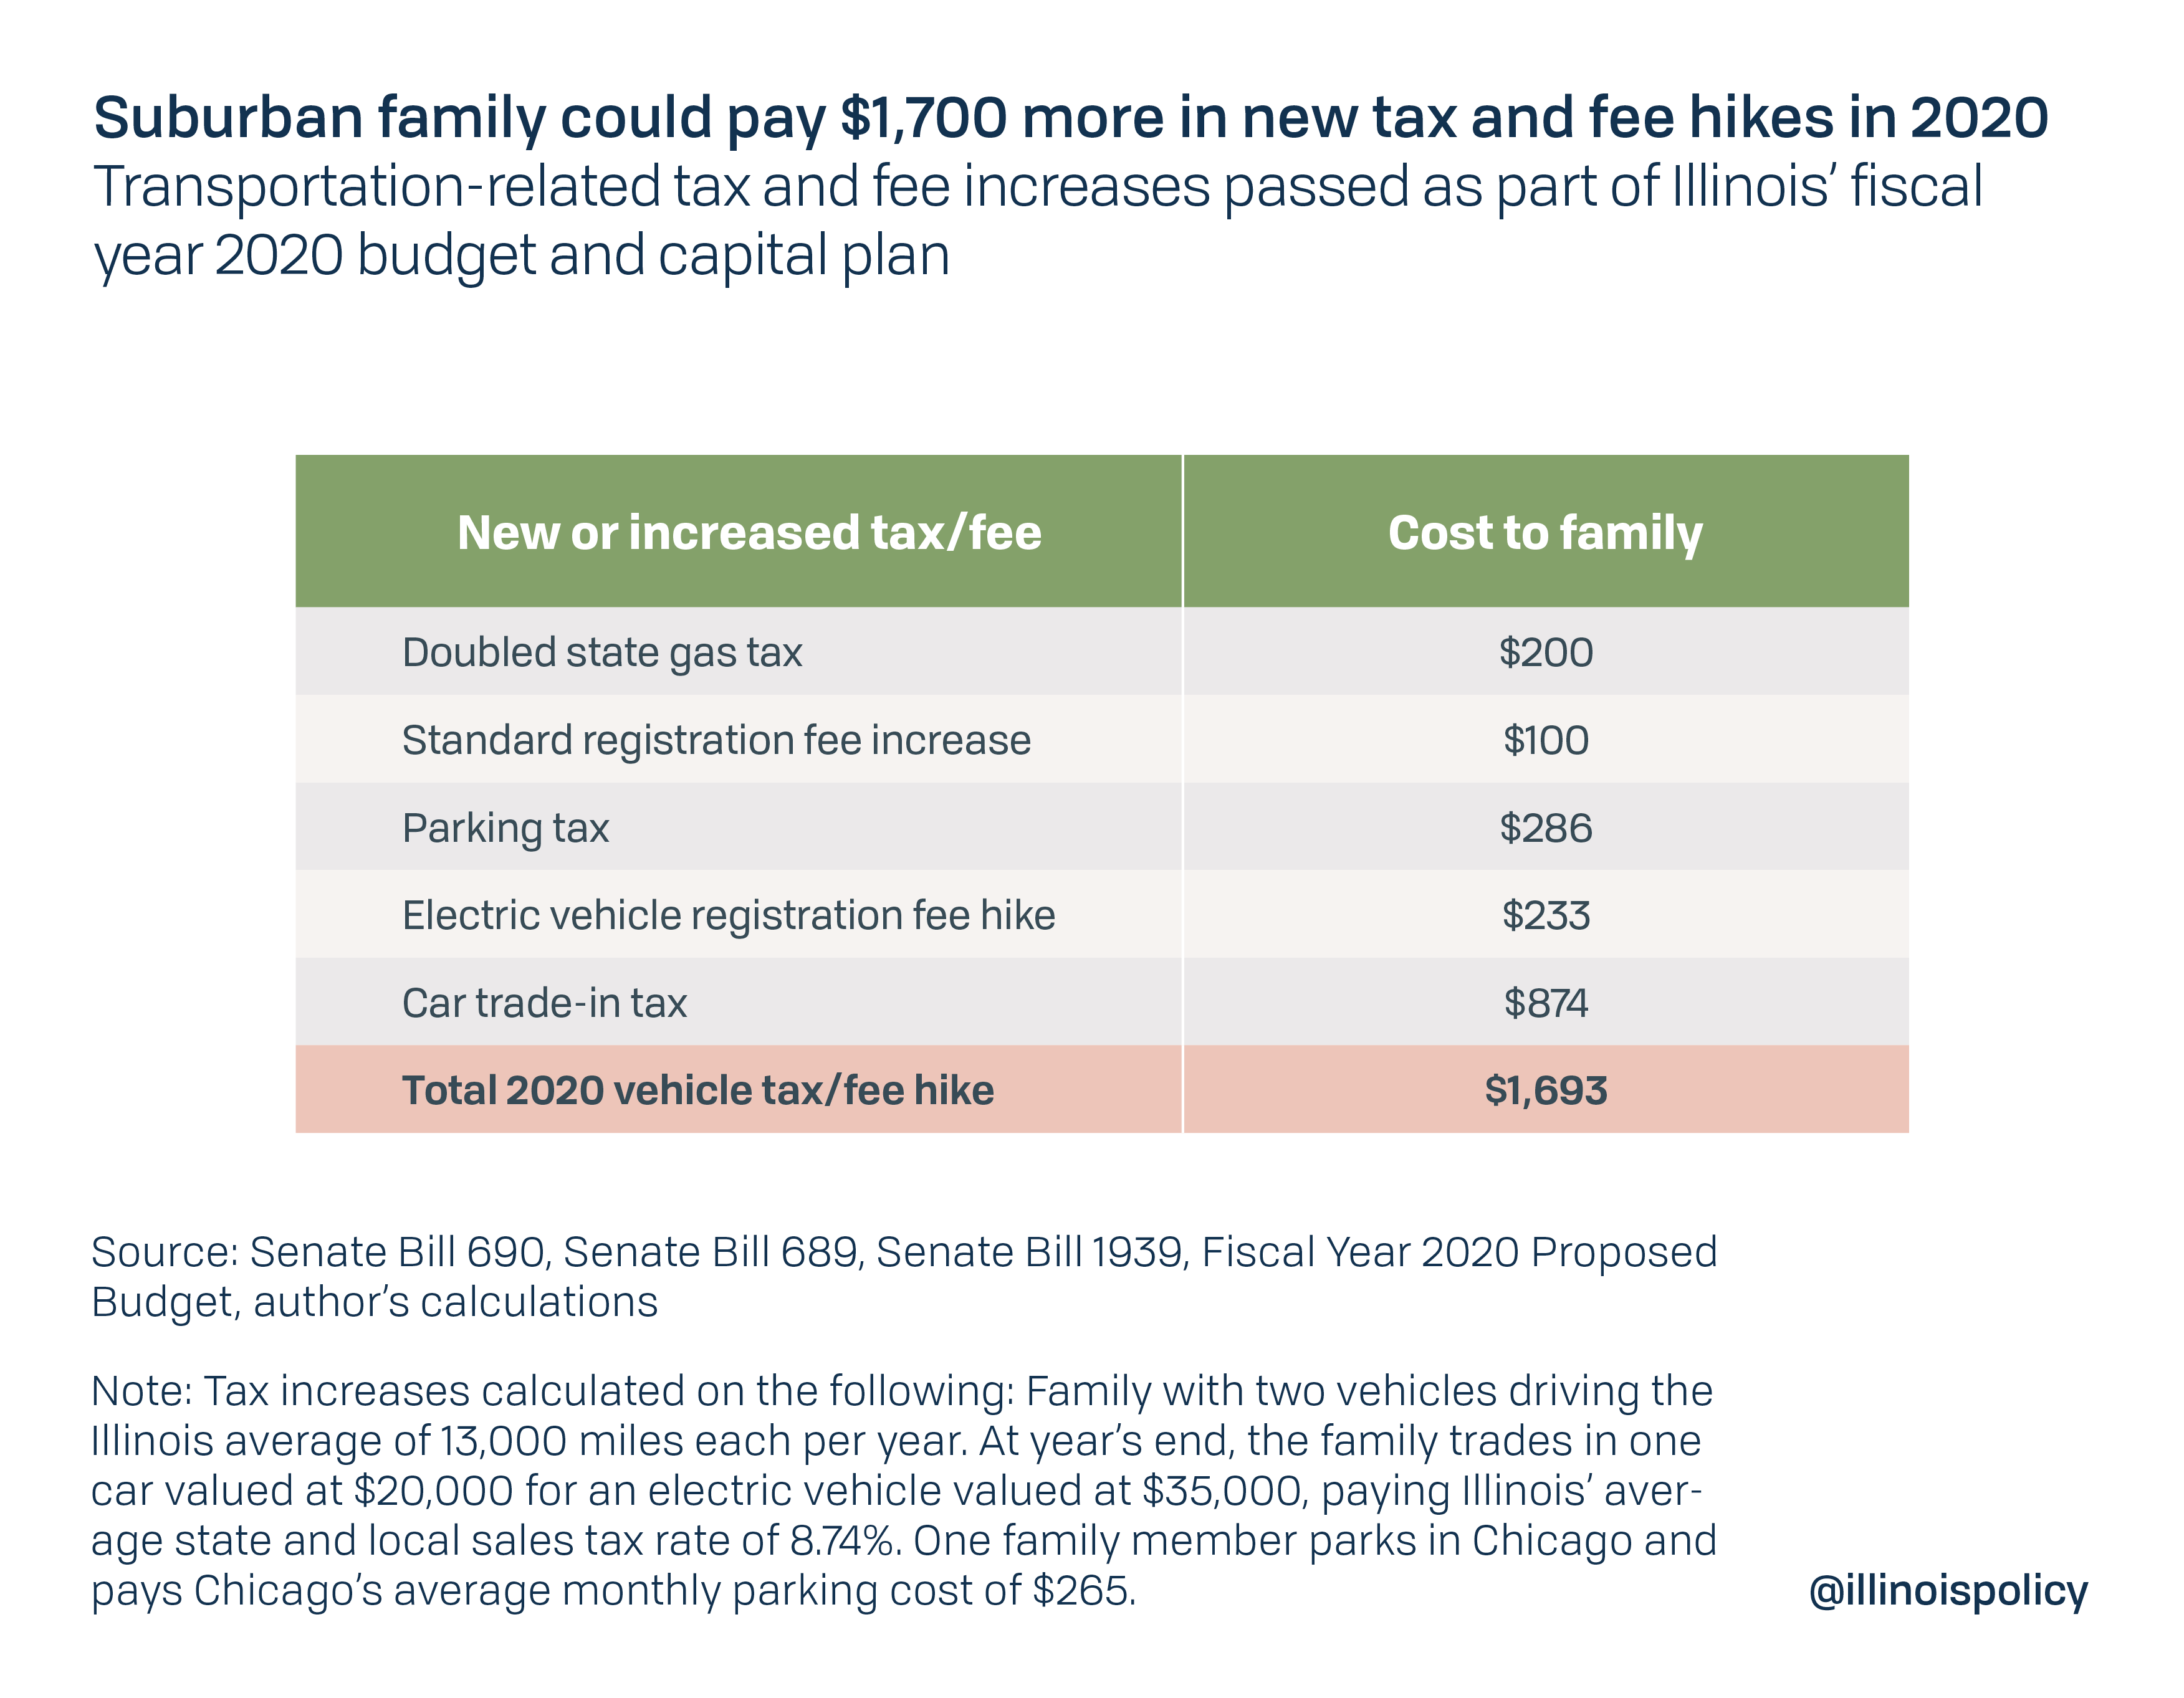 Suburban family could pay $1,700 more in new tax and fee hikes in 2020